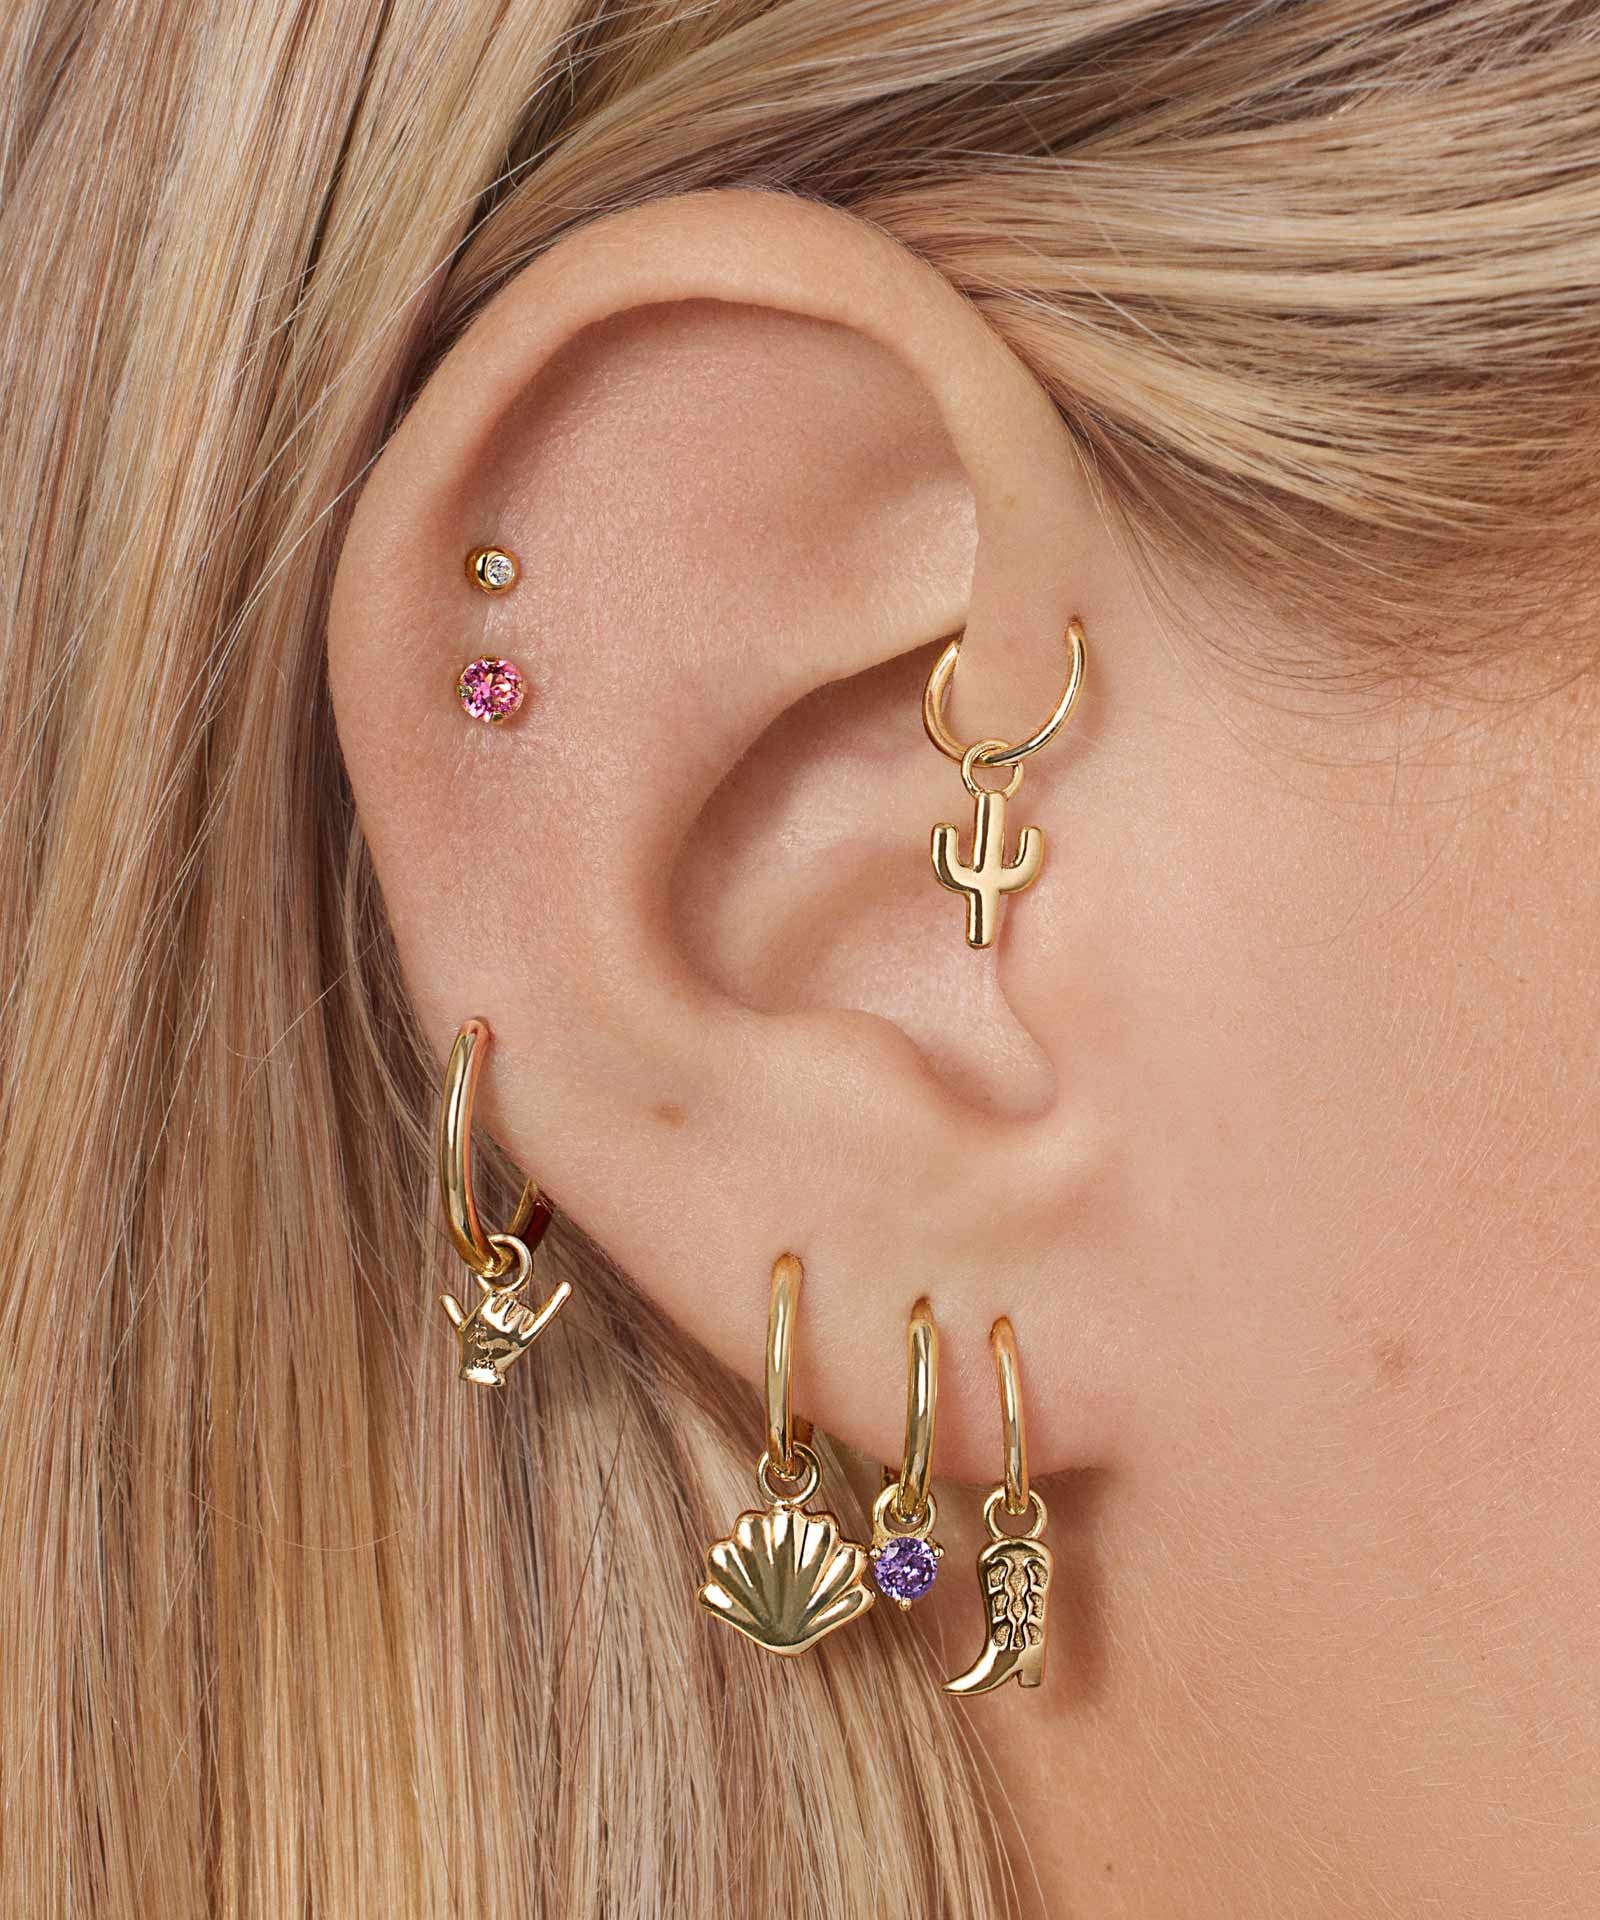 Leafs Ear Cuff With Chain Earring Set Silver Double Piercing  Etsy  Singapore